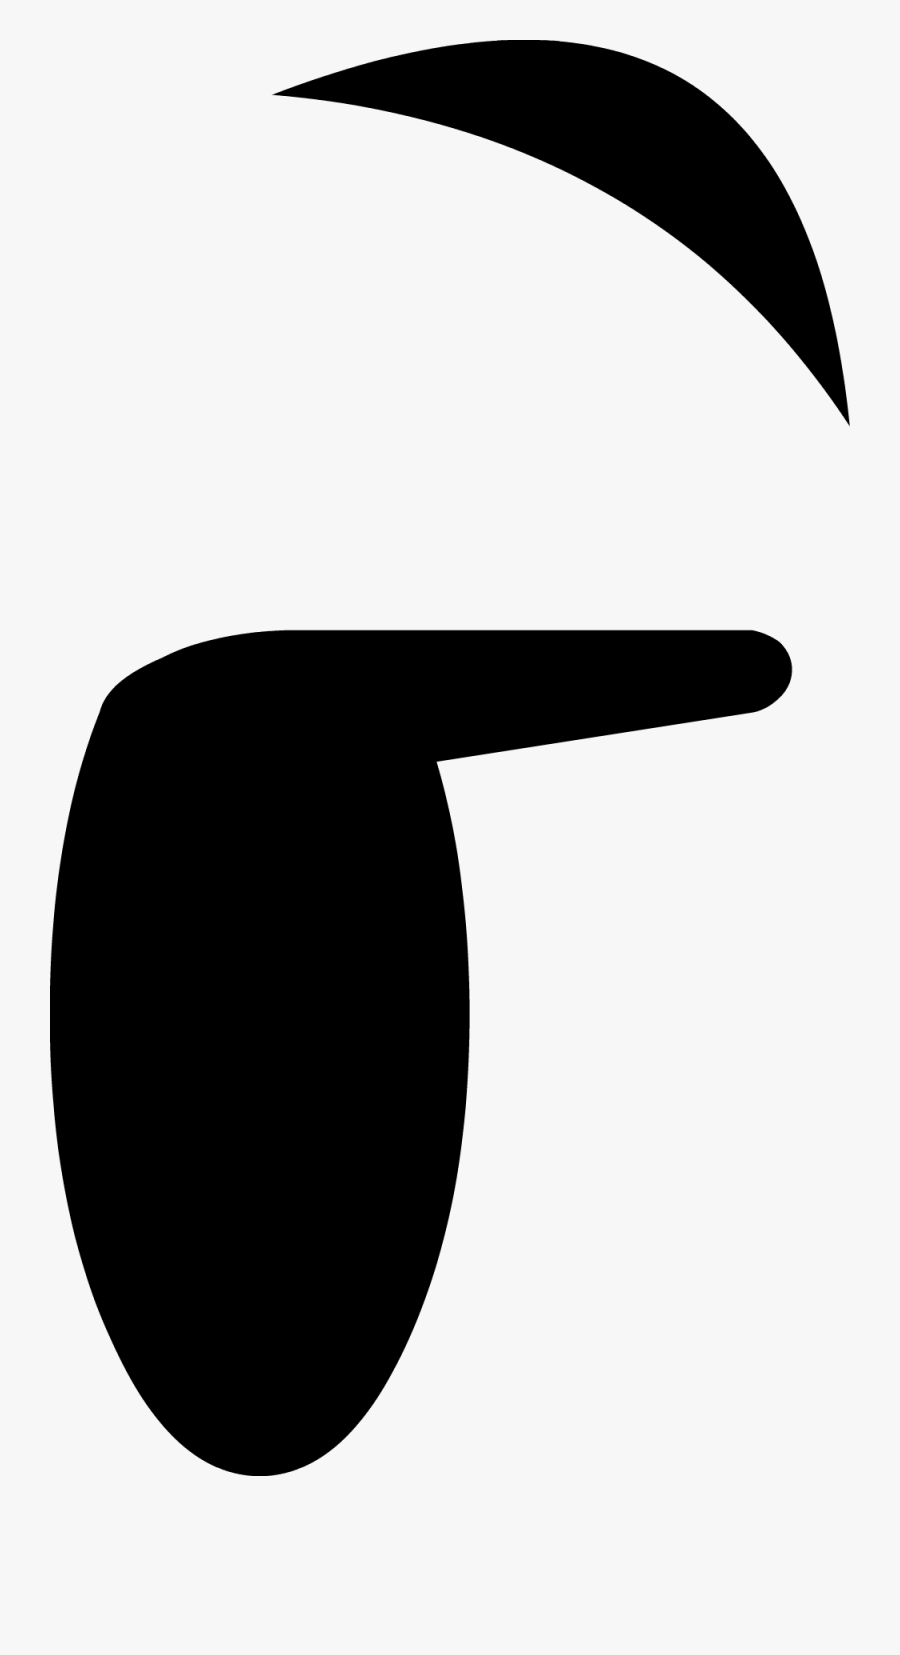 Low Eye With Raised Eyebrow - Bfdi Assets Faces And Limbs, Transparent Clipart